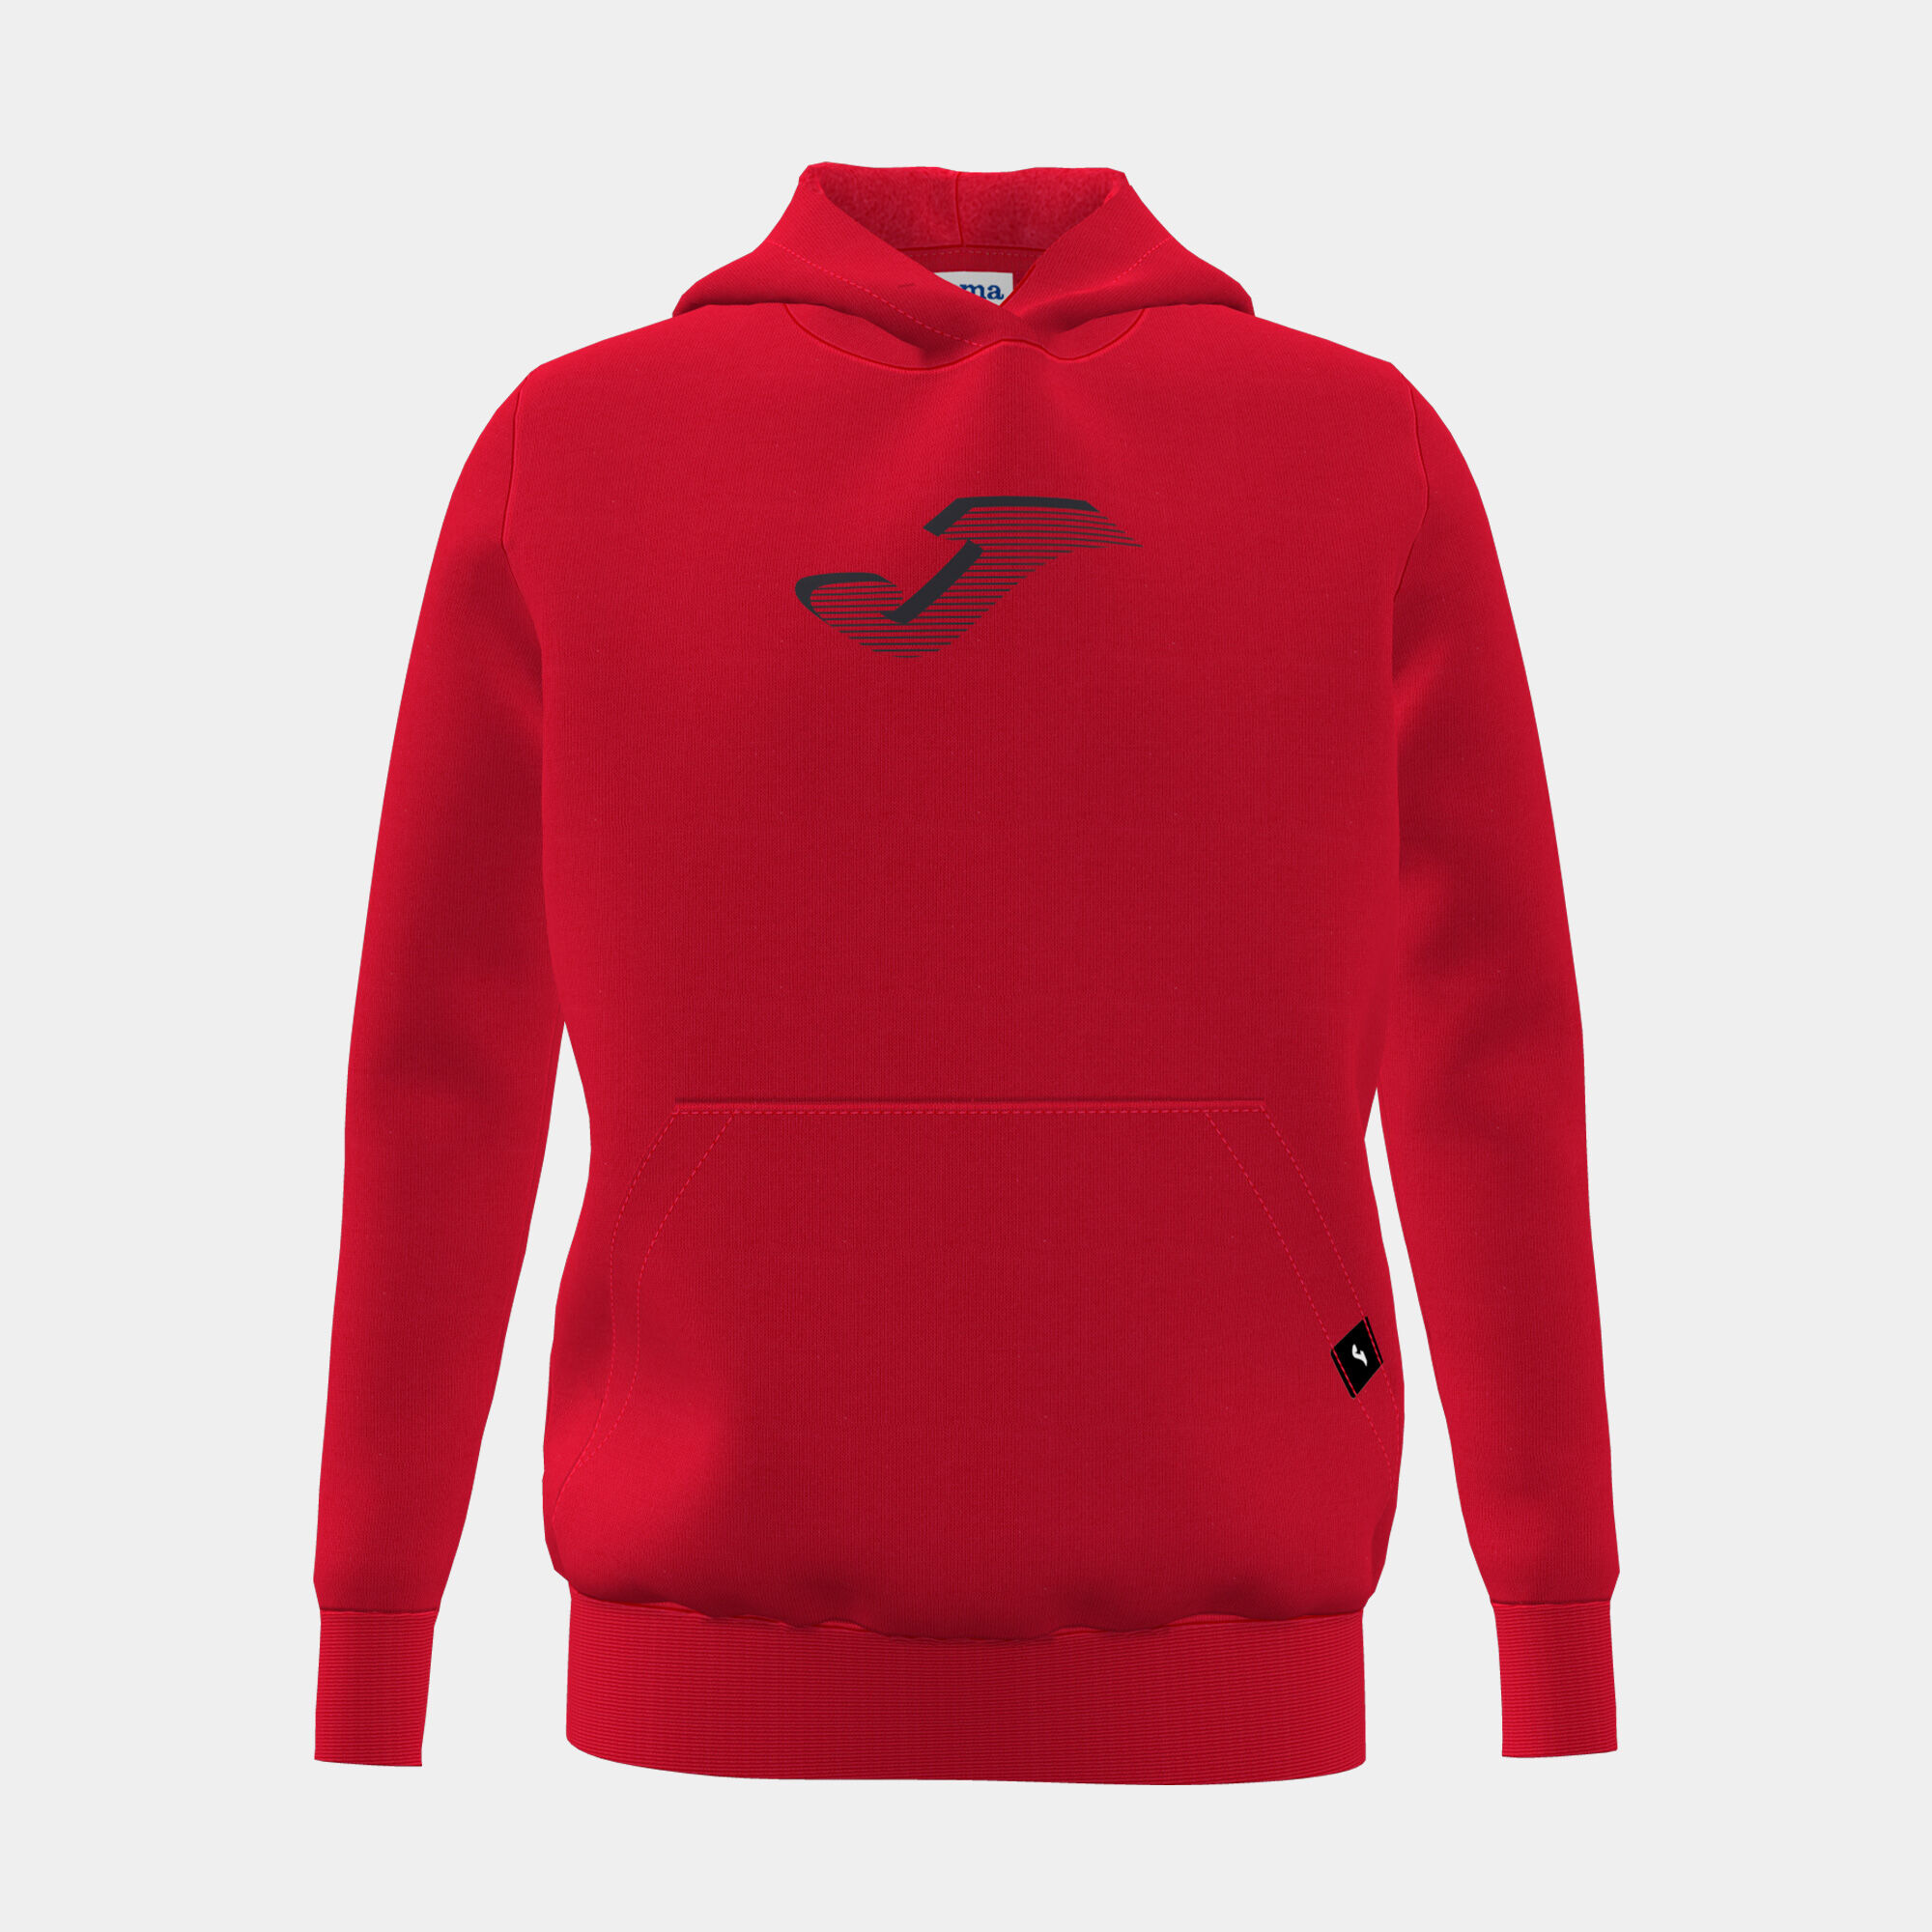 Hooded sweater unisex Gamma red